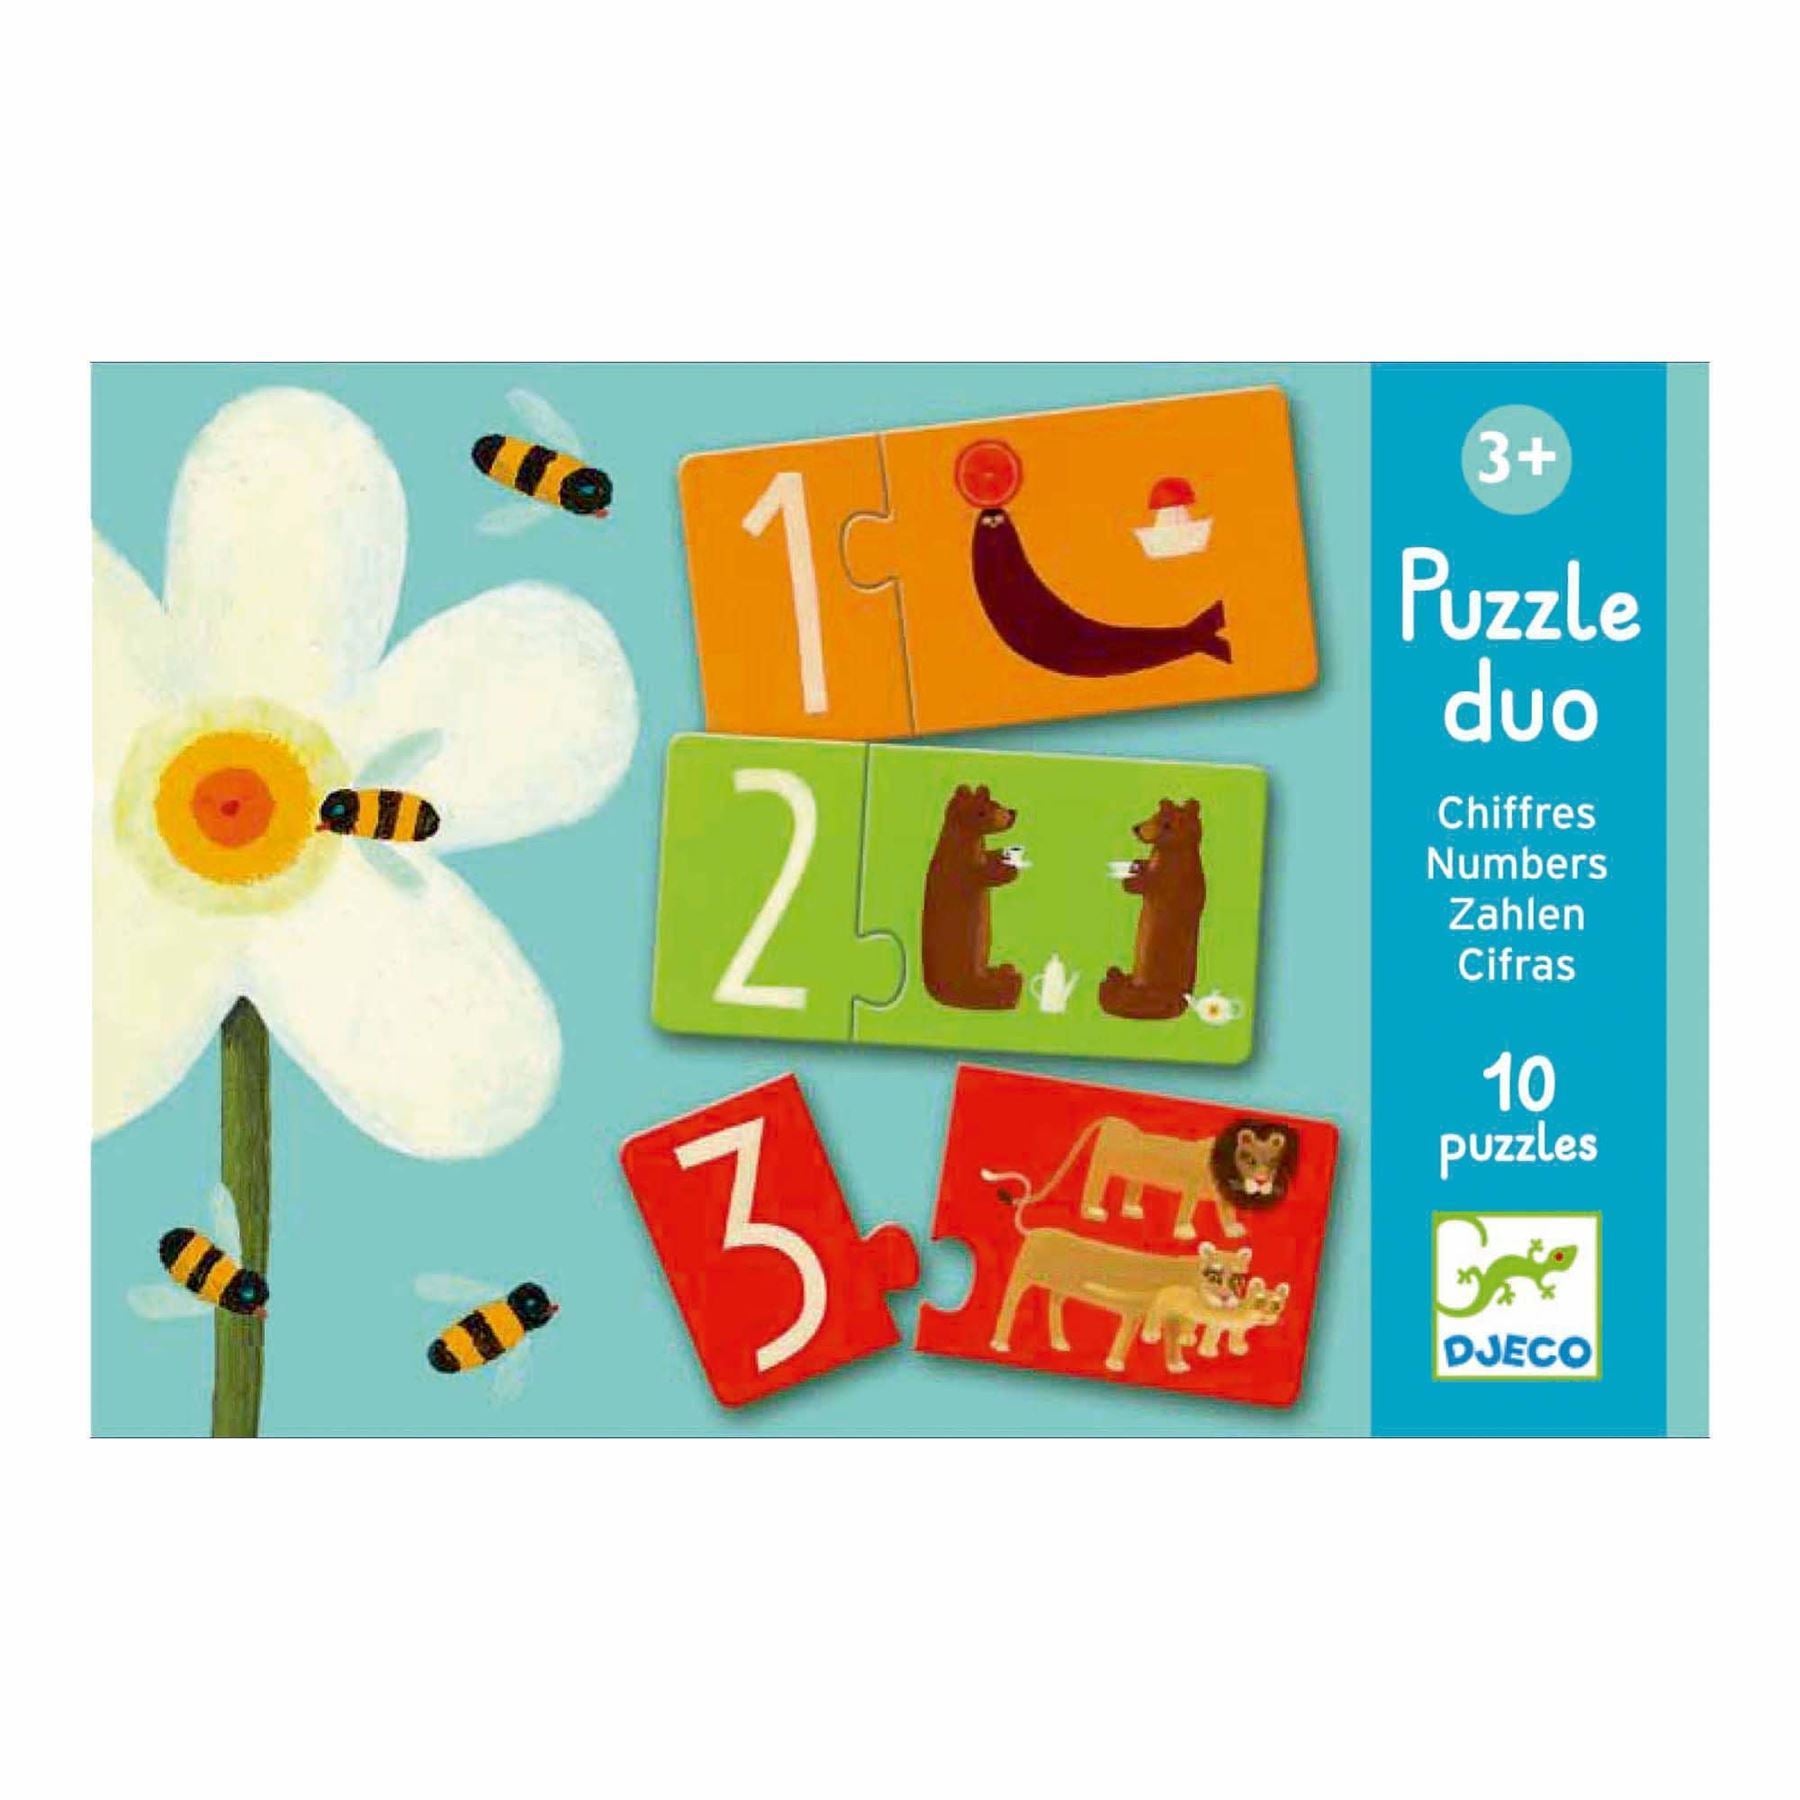 Djeco Duo Puzzle - Numbers - I Want That Present